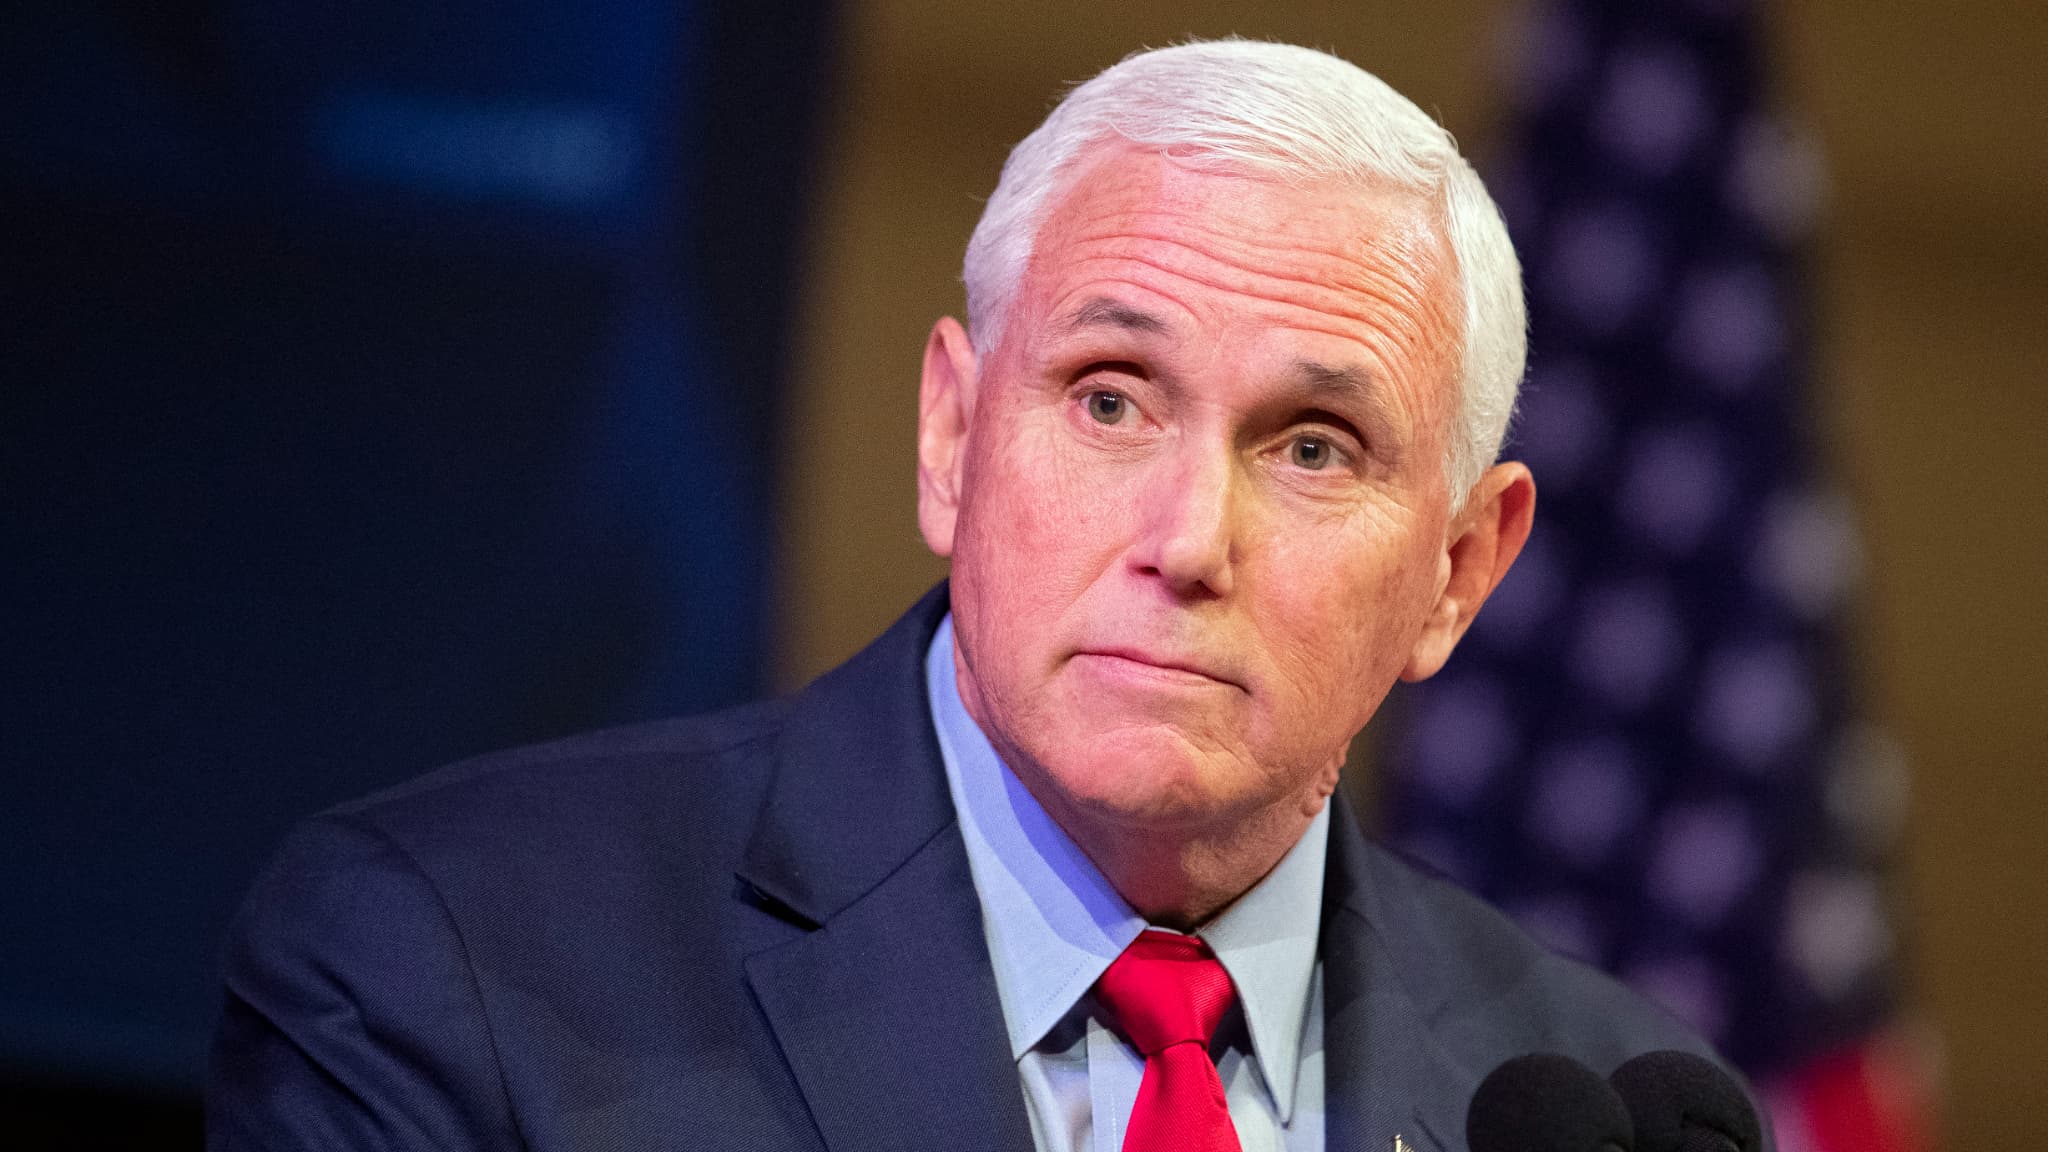 Mike Pence, former Vice President of Donald Trump, will not support him in the presidential race